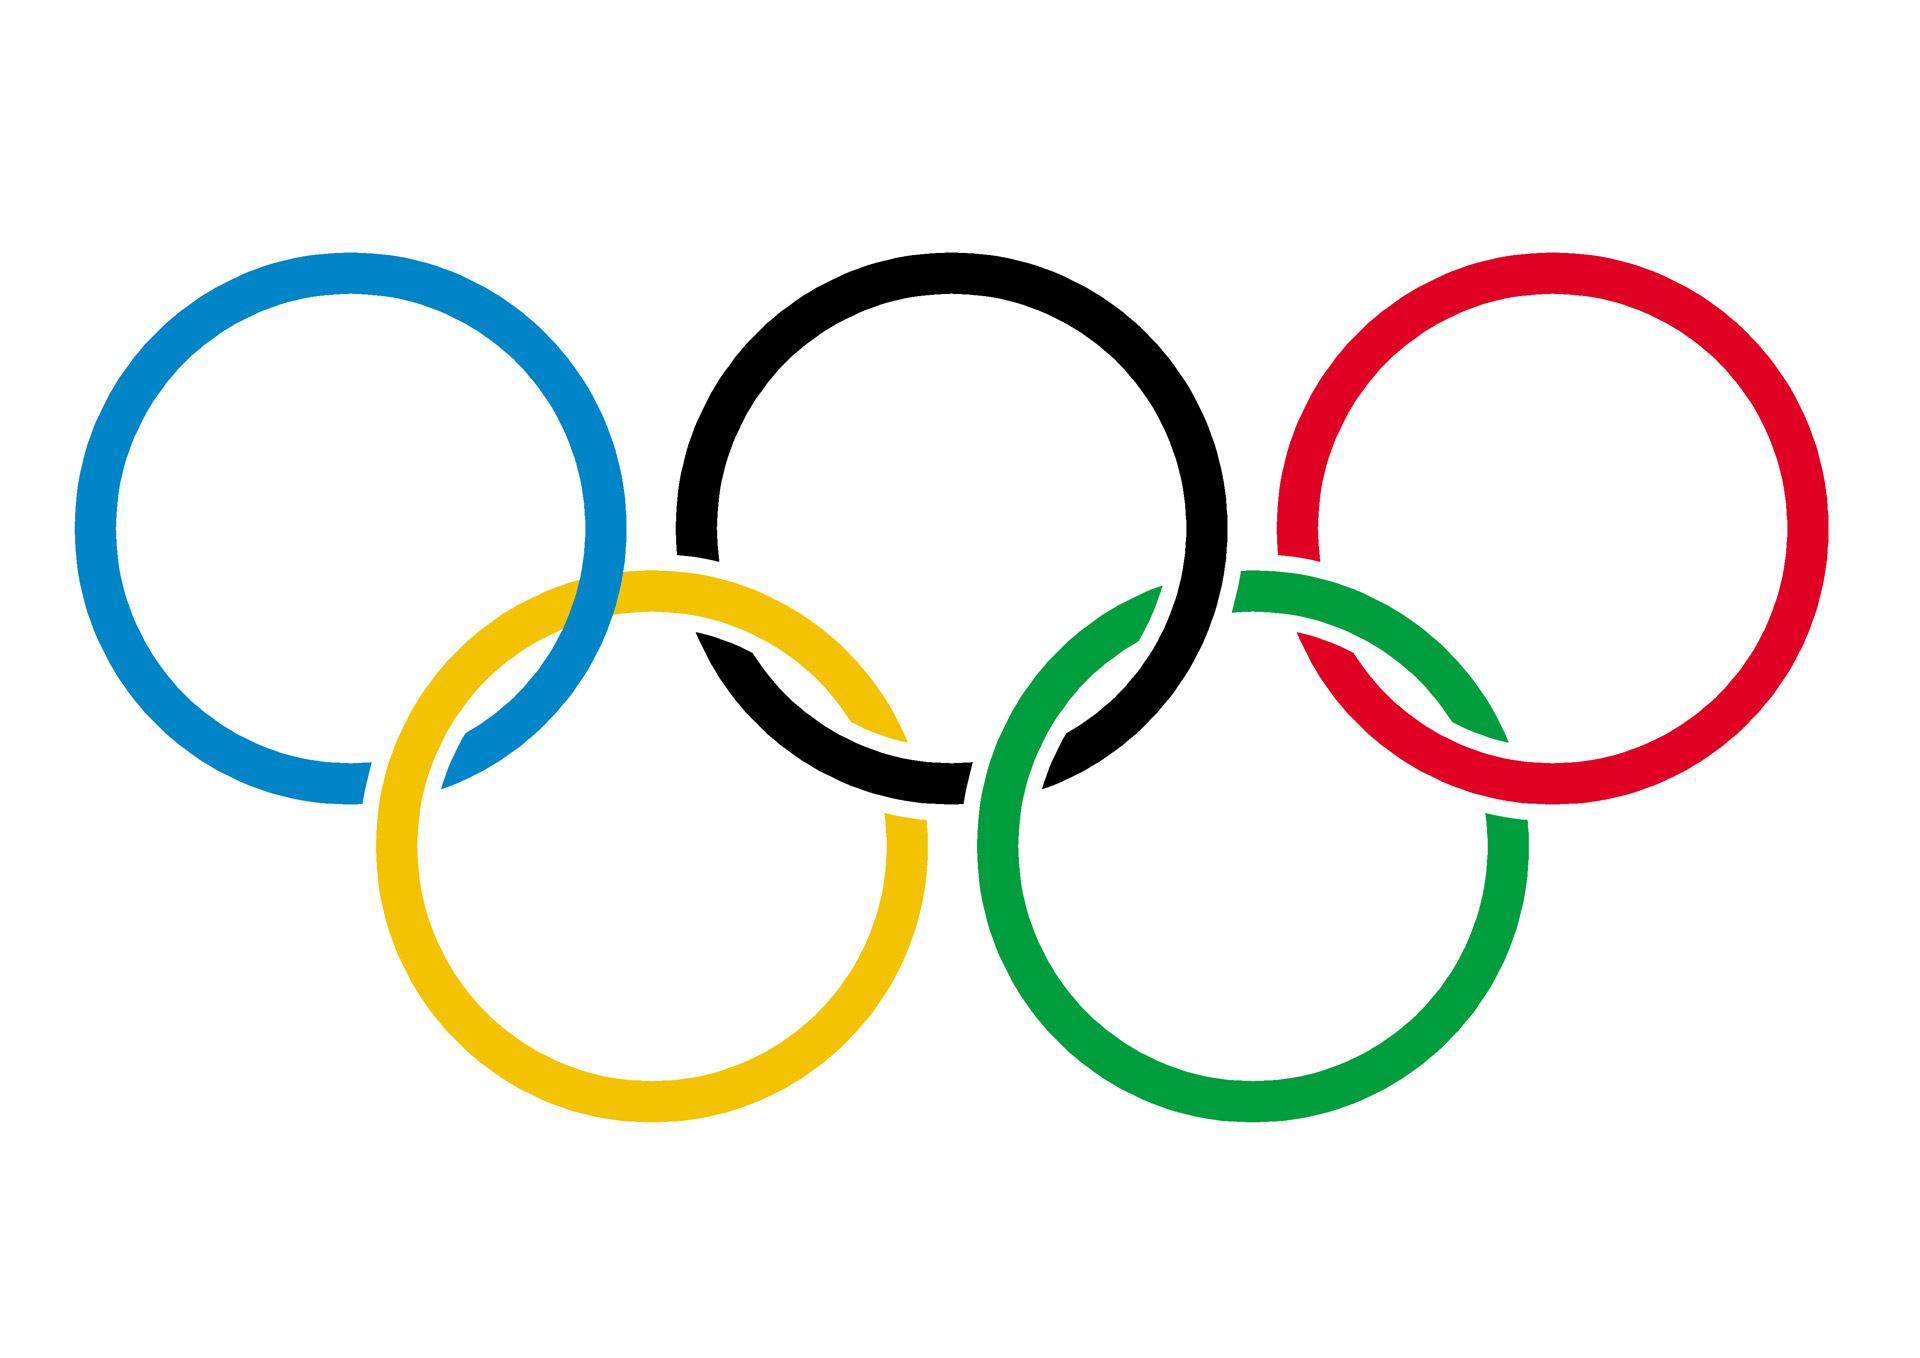 Support For Boston 2024 Is Not Too Low To Win Olympic Bid